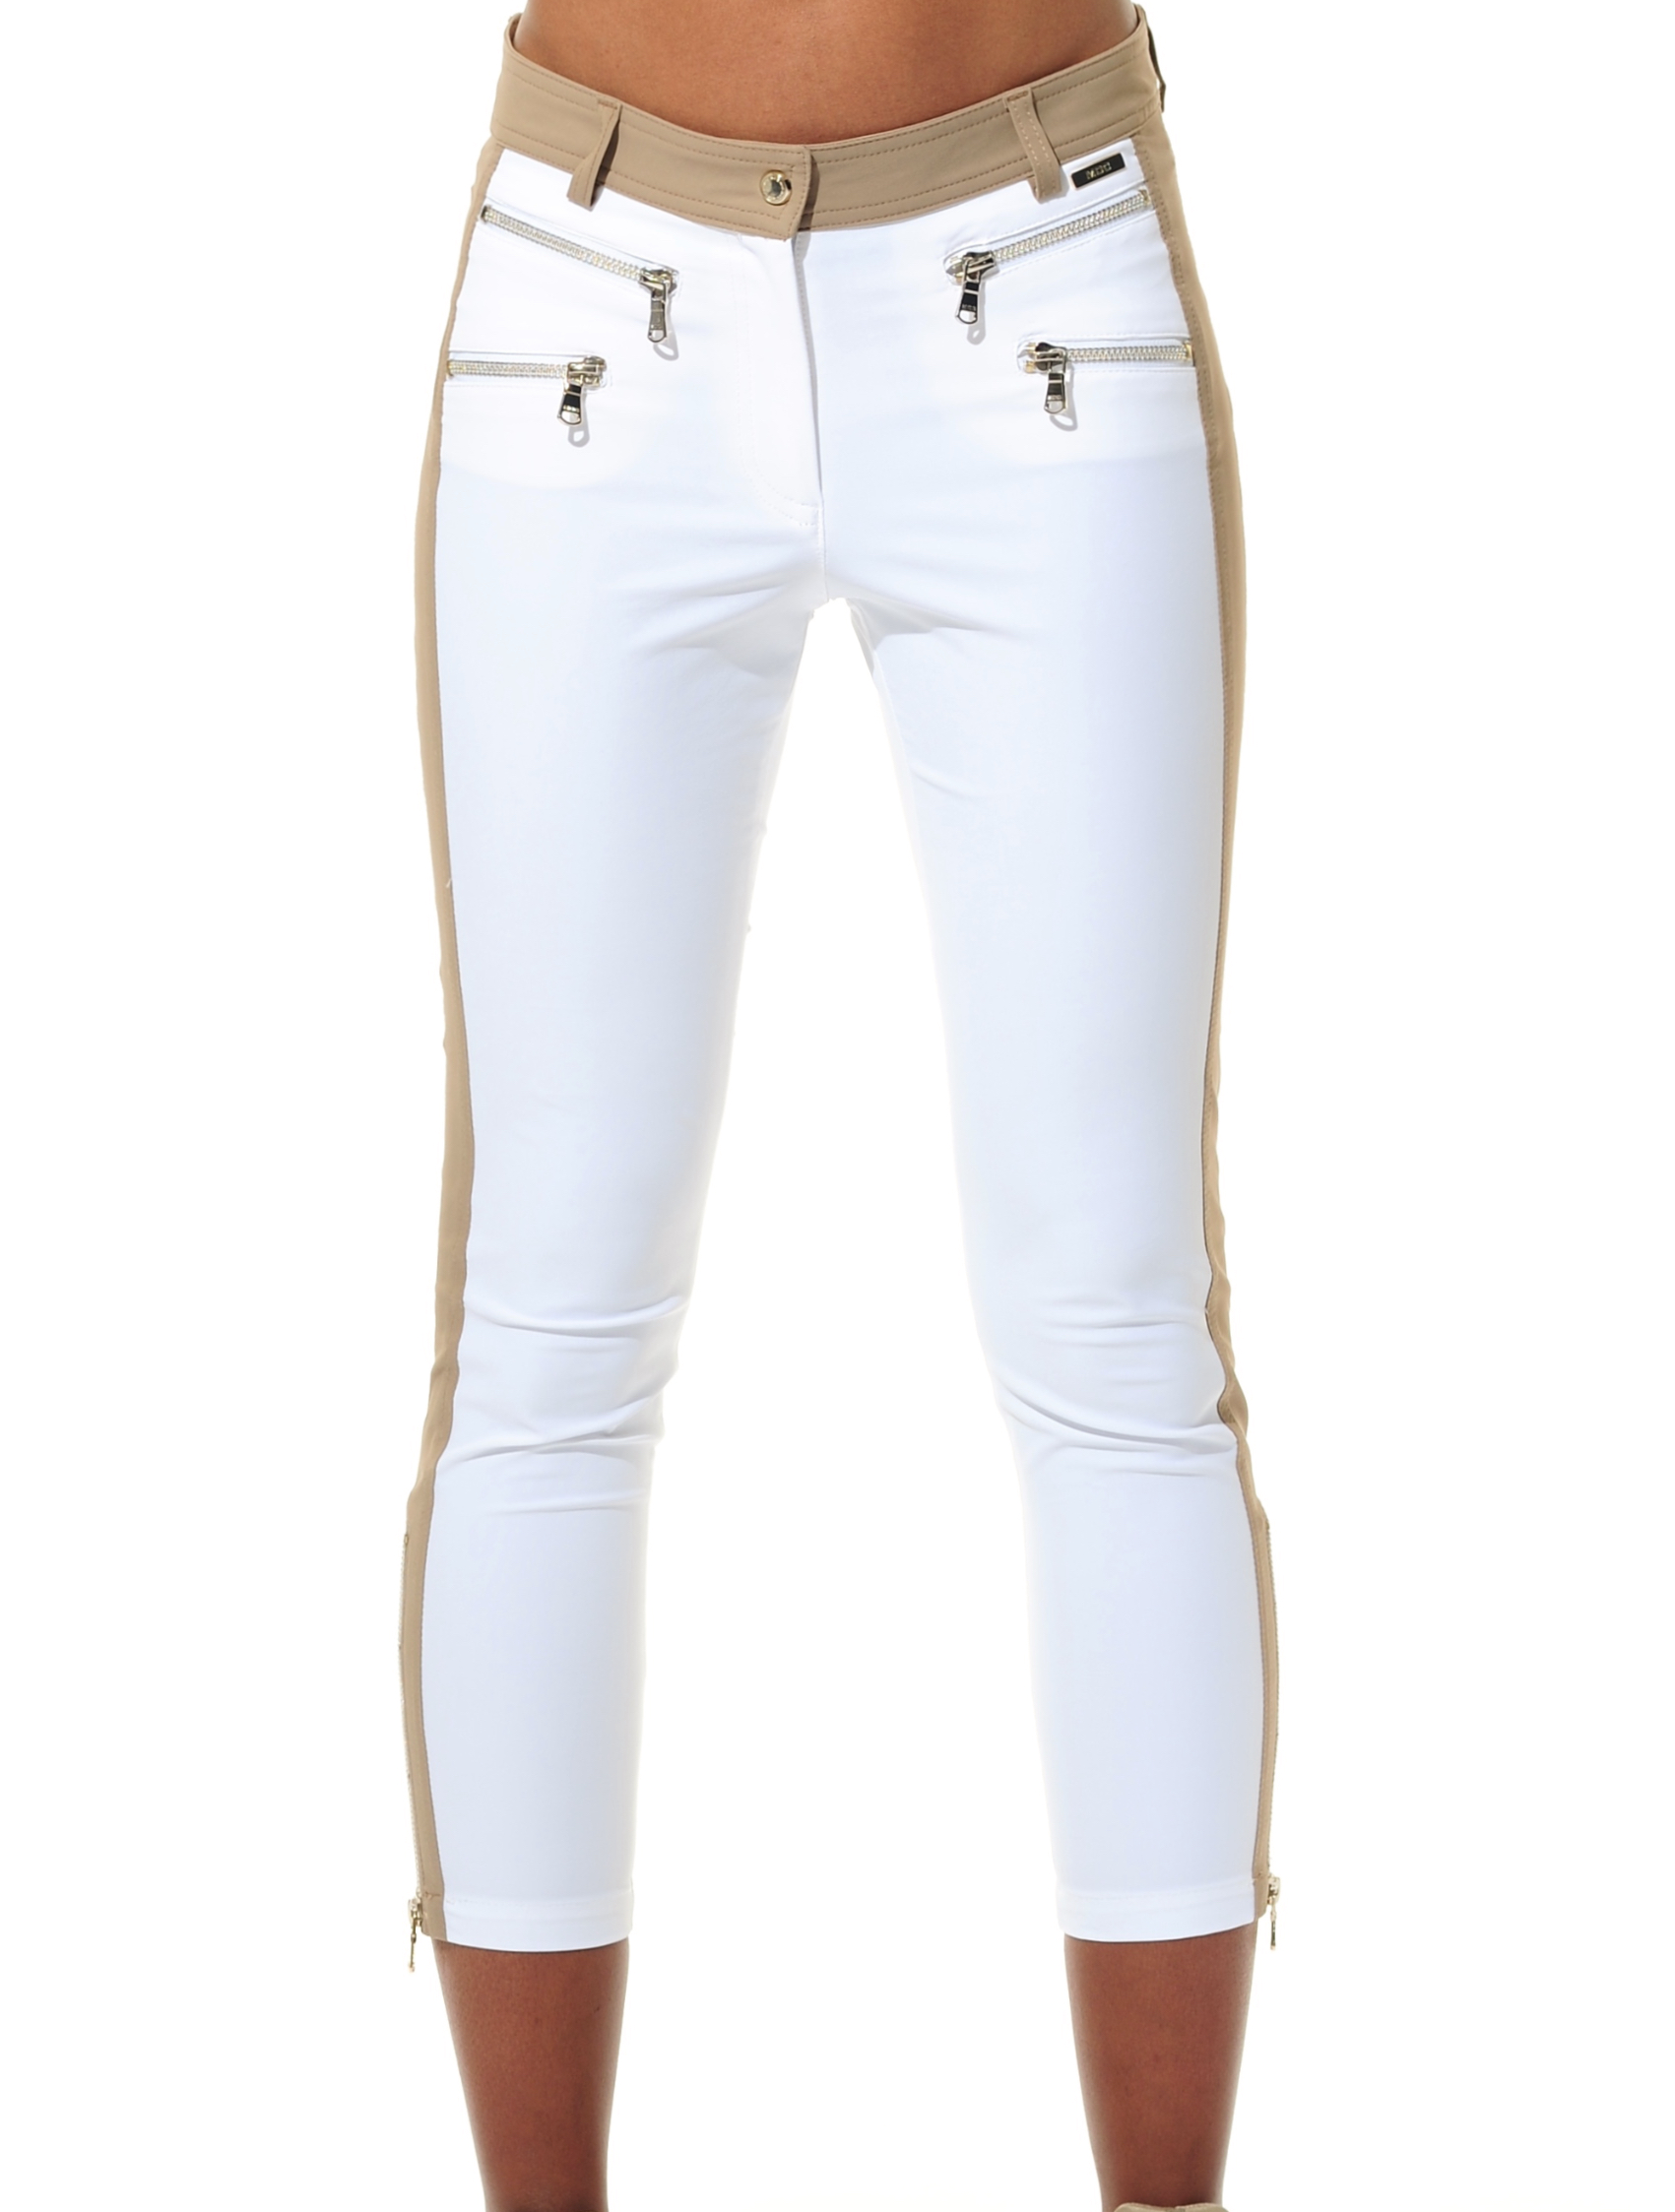 4way stretch double zip cropped pants white/chestnut 